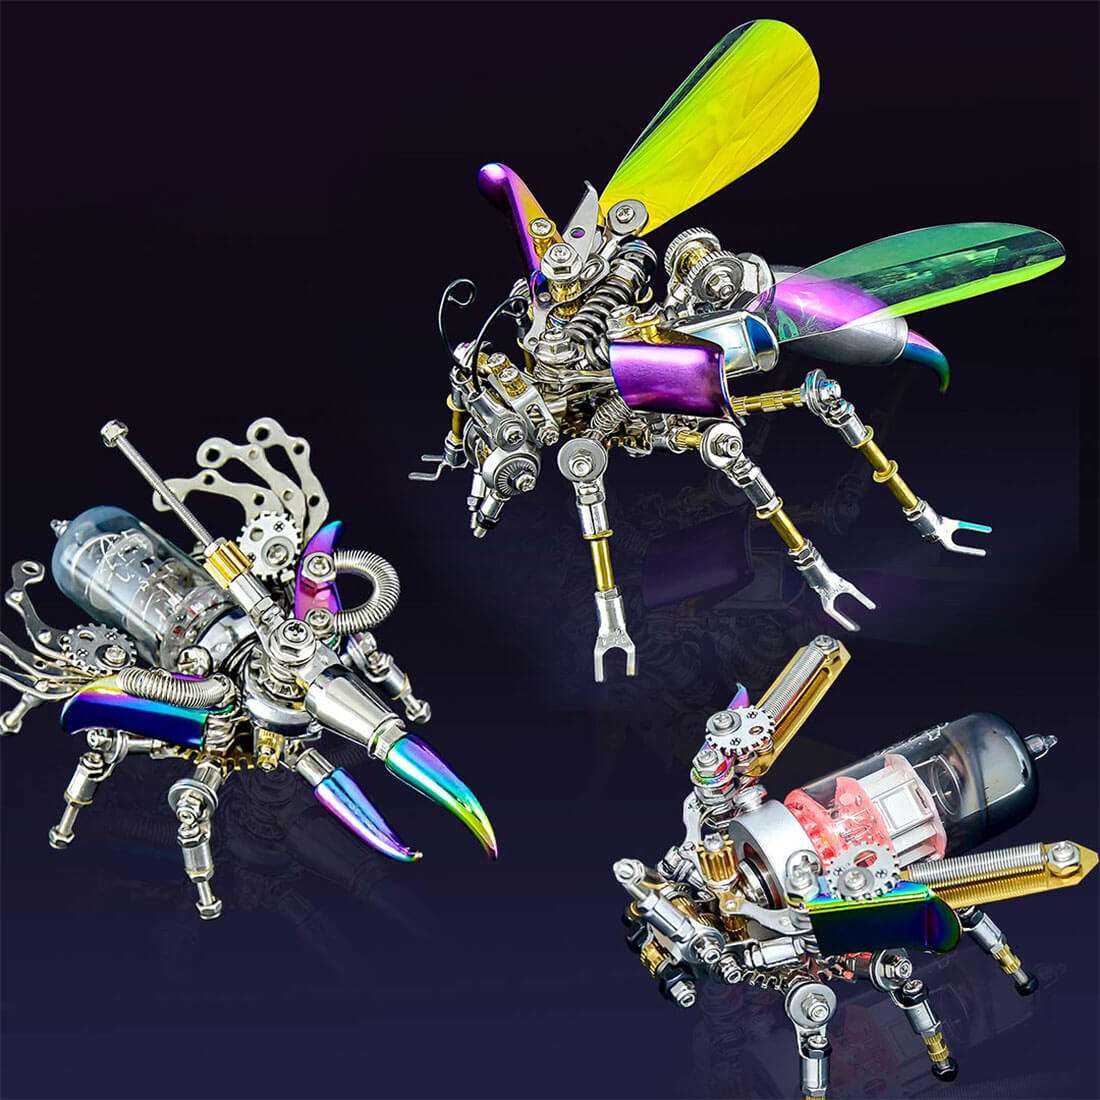 Punk Rhinoceros Beetle 3D Metal Puzzle Insect DIY Kits with Light